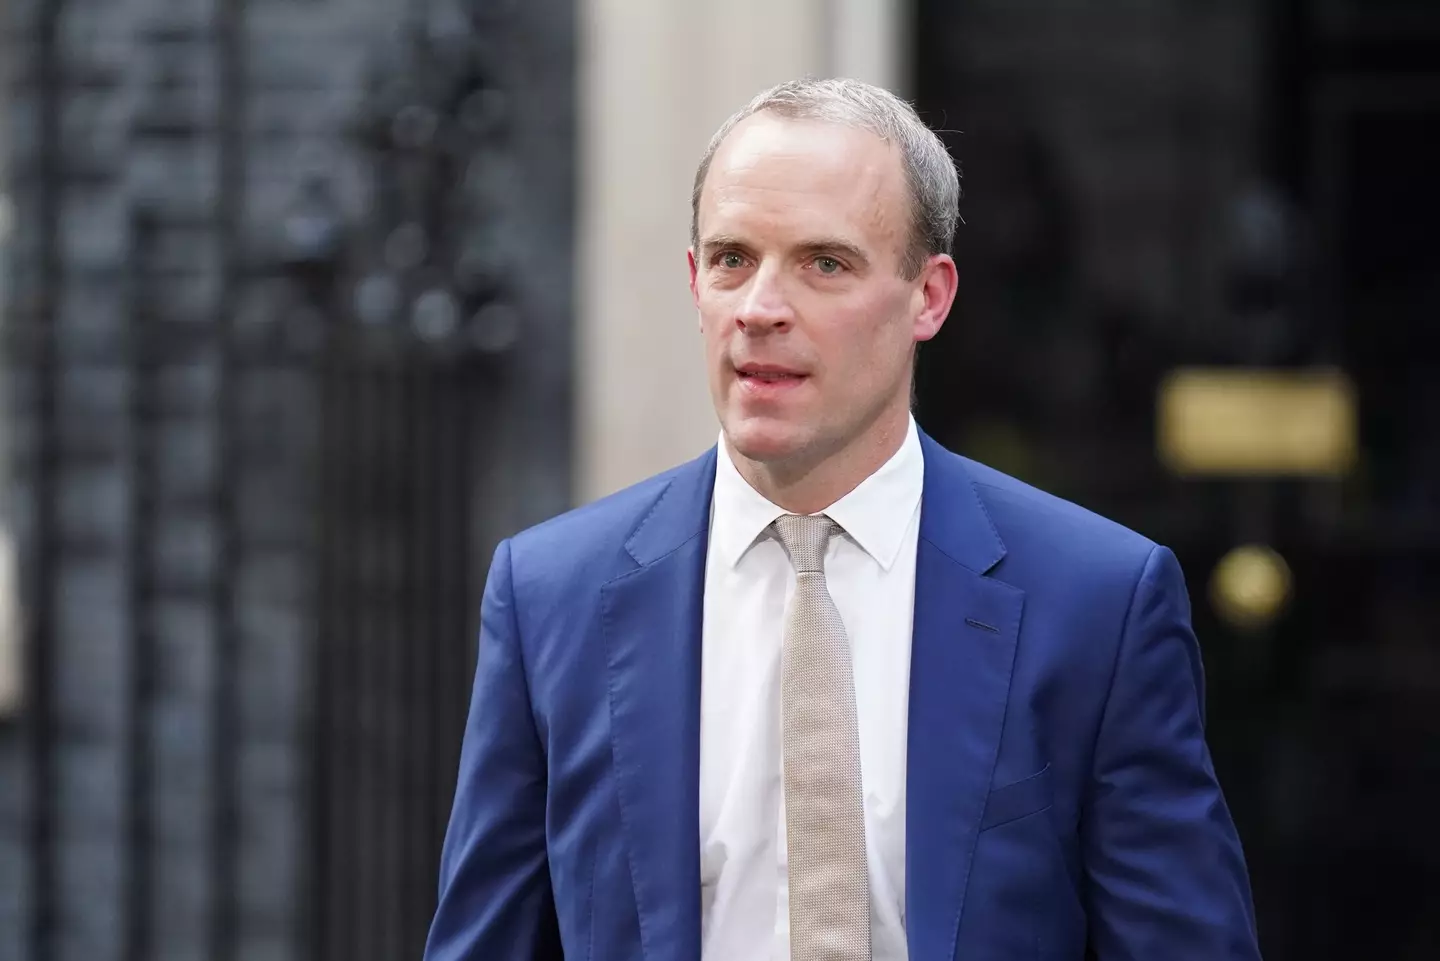 Dominic Raab had promised to resign following the conclusion of the inquiry into bullying allegations.